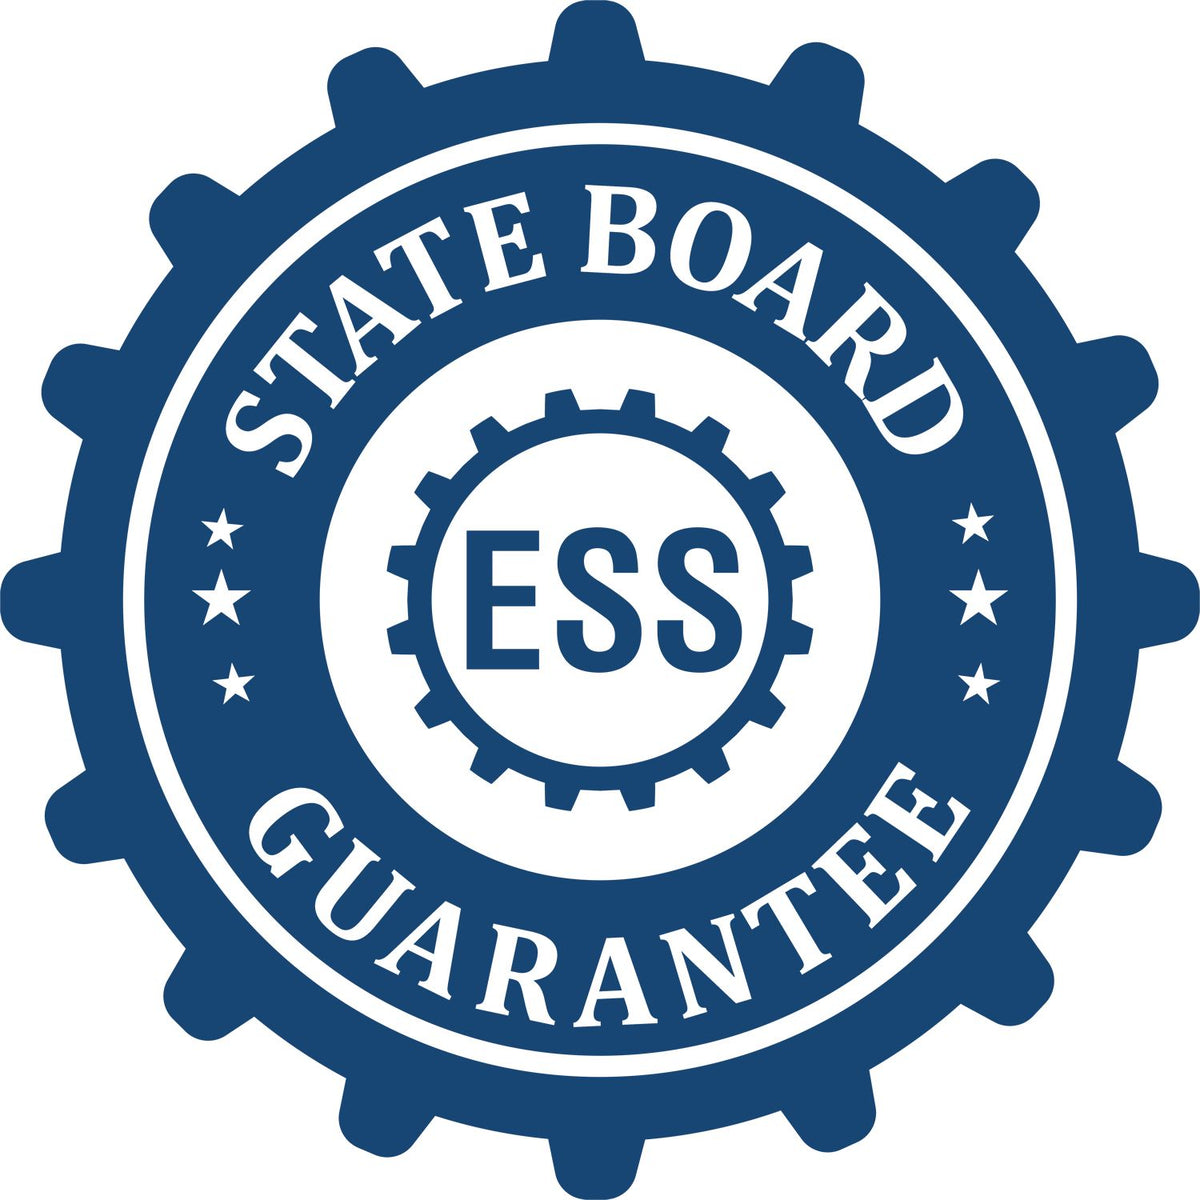 An emblem in a gear shape illustrating a state board guarantee for the Hybrid Tennessee Land Surveyor Seal